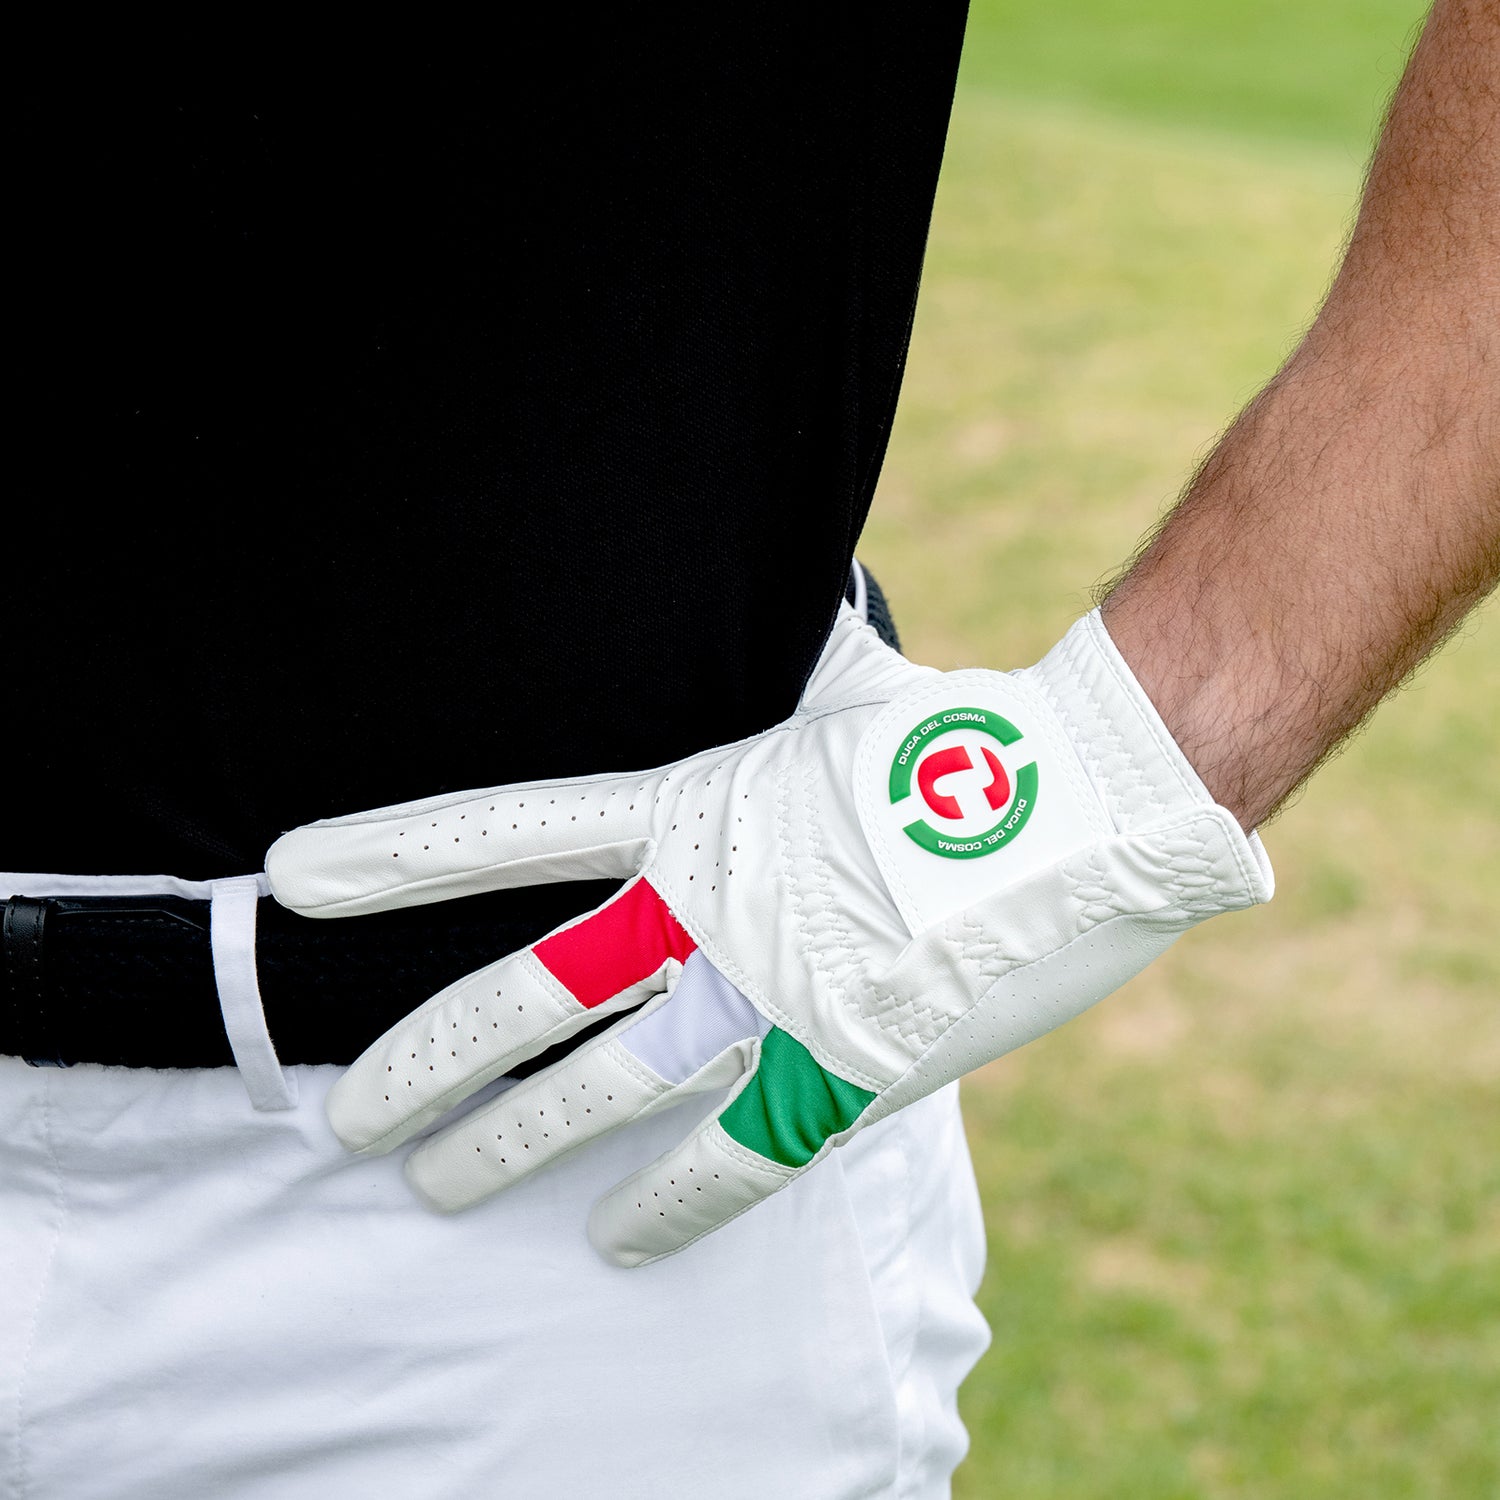 Shop Golf Gloves for men by Duca del Cosma. Men's golf gloves from cabretta leather